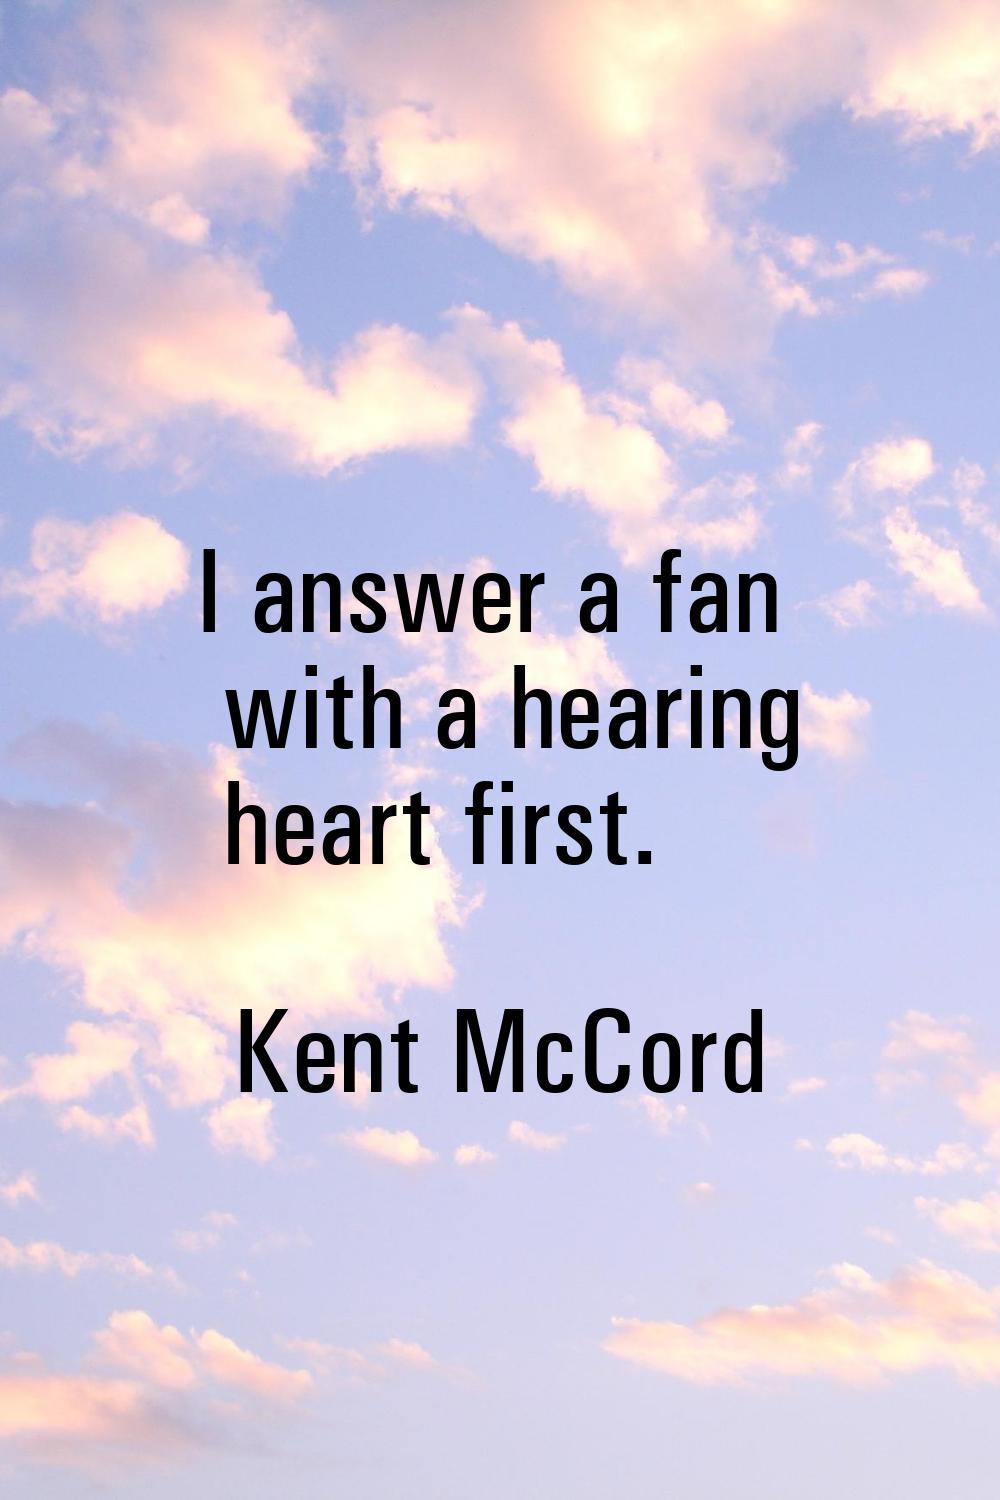 I answer a fan with a hearing heart first.